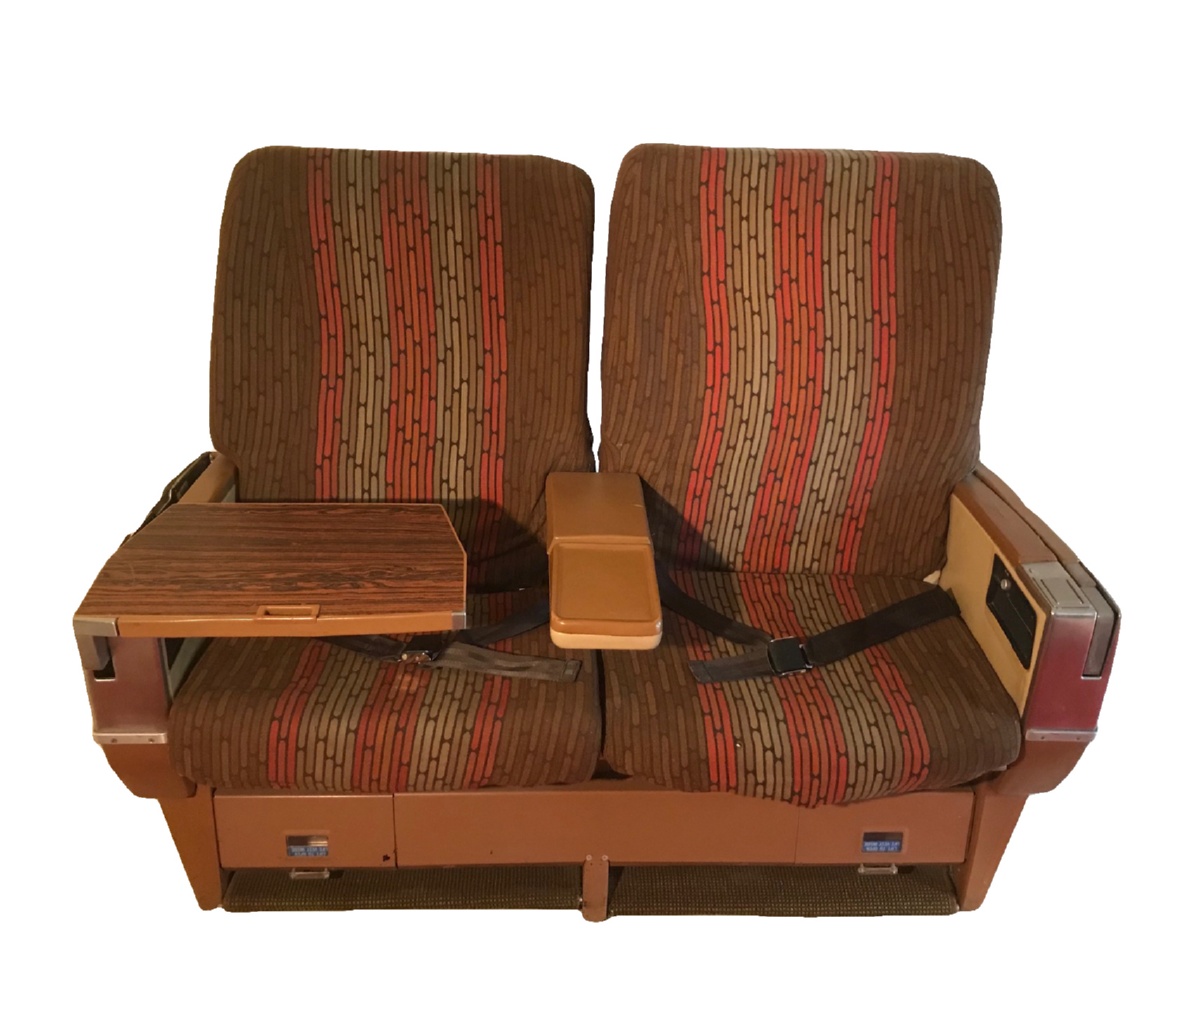 Eastern Airlines First Class Seats Front